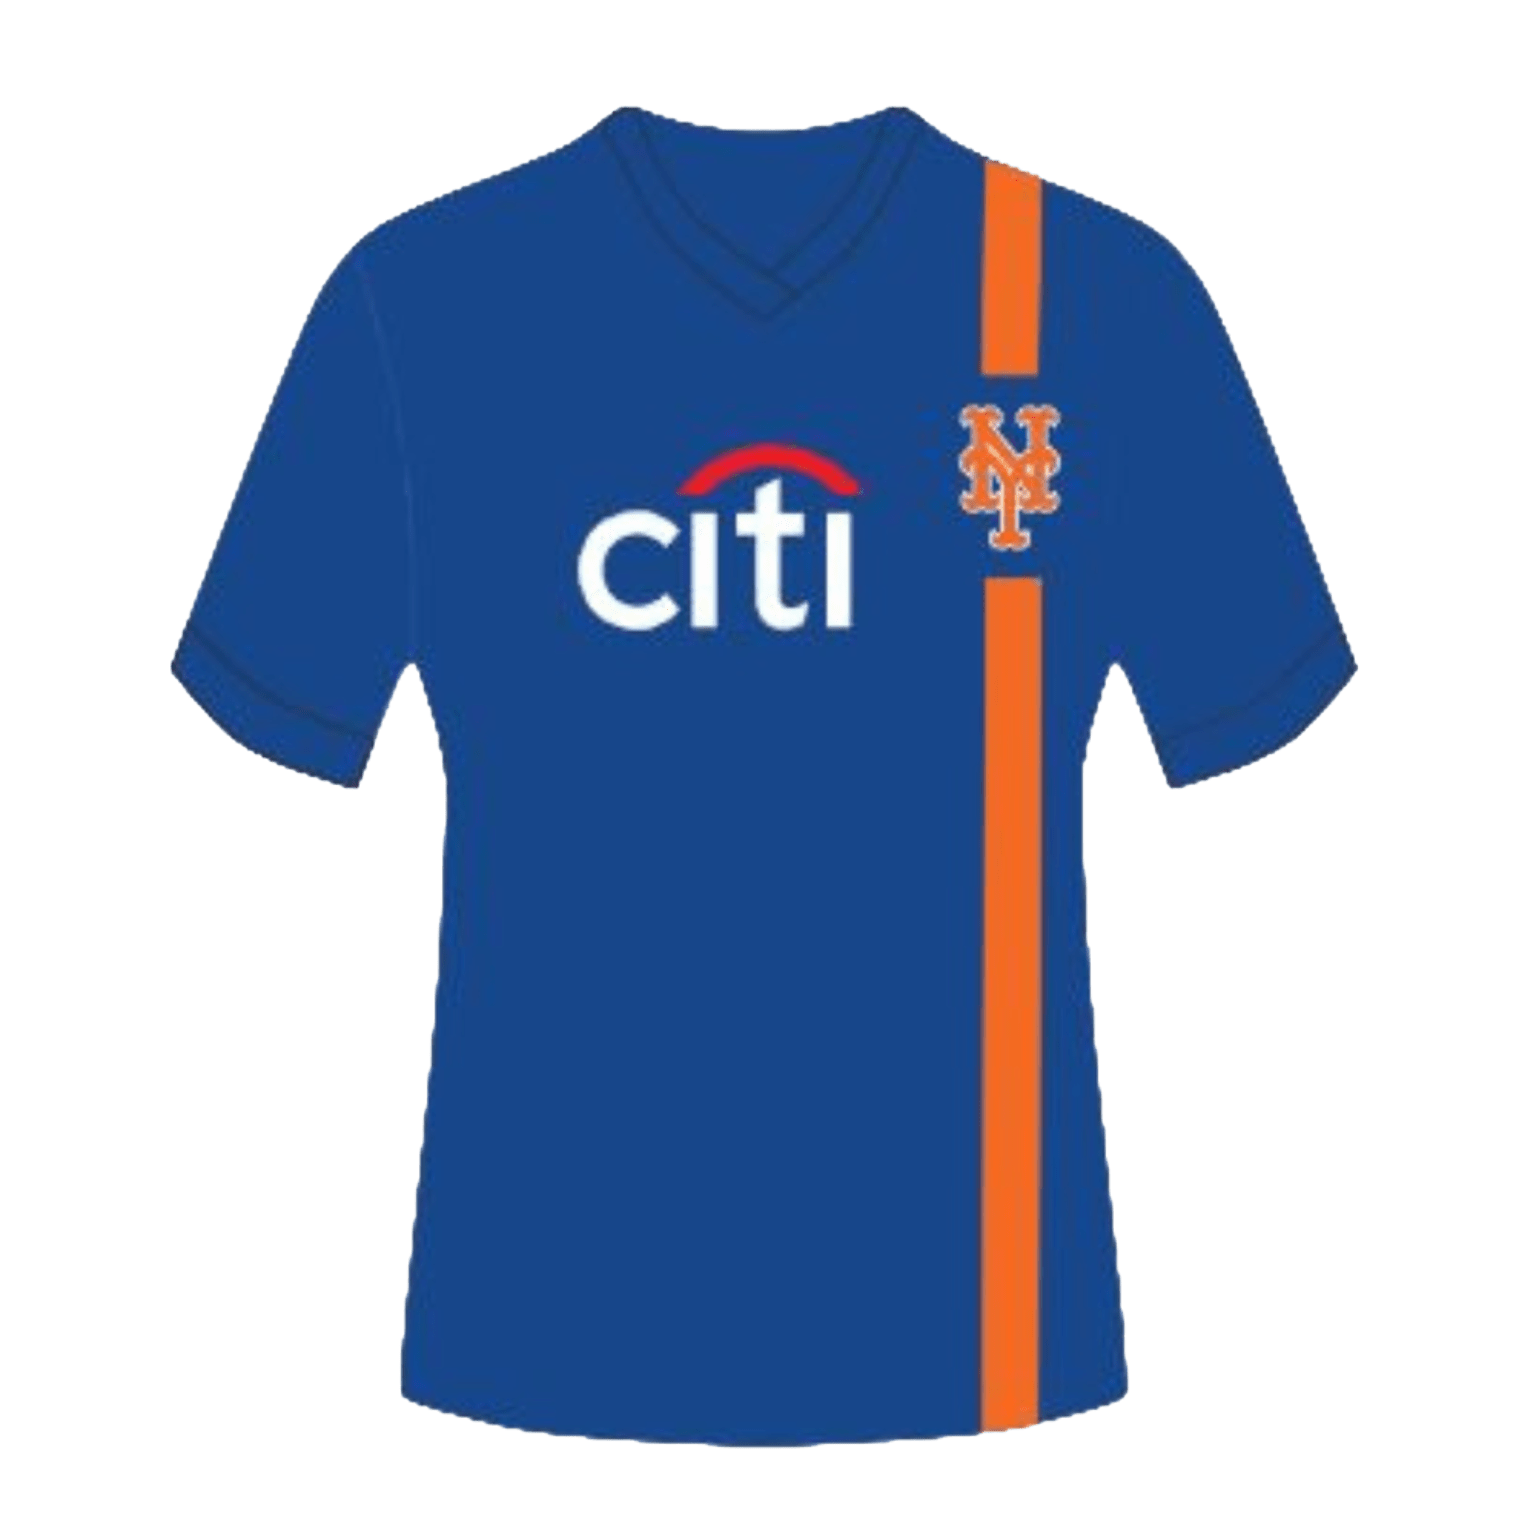 Promotional Giveaway / Event Schedule New York Mets